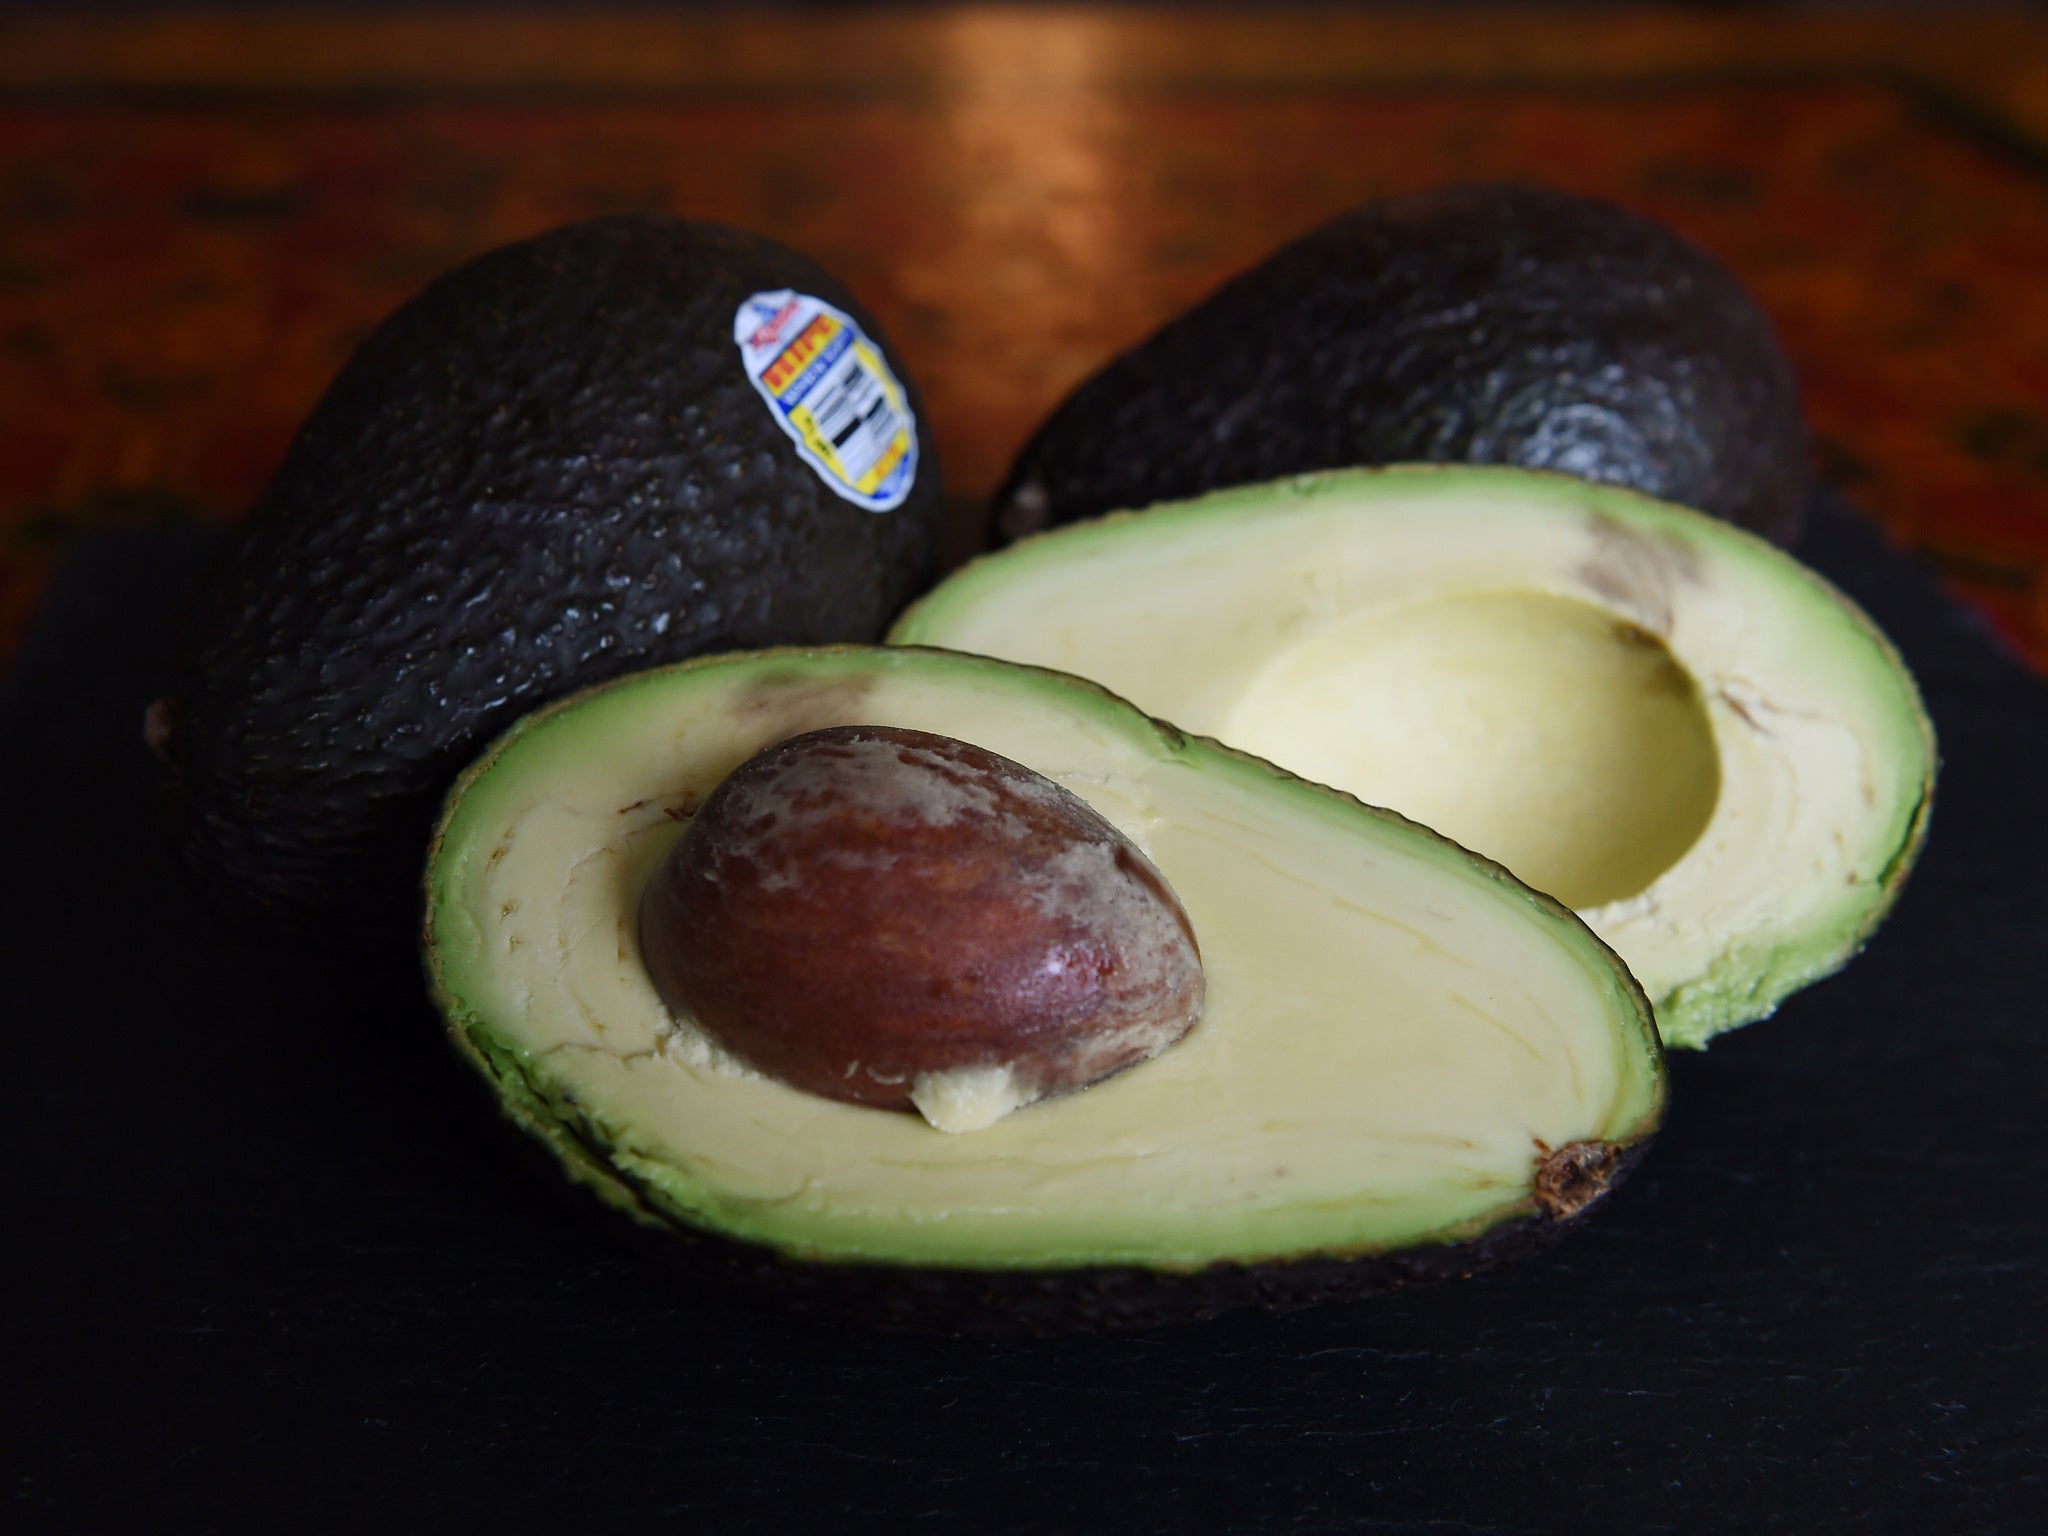 Scientists have discovered a lipid within avocados that helps to target stem cells of the rare form of leukaemia